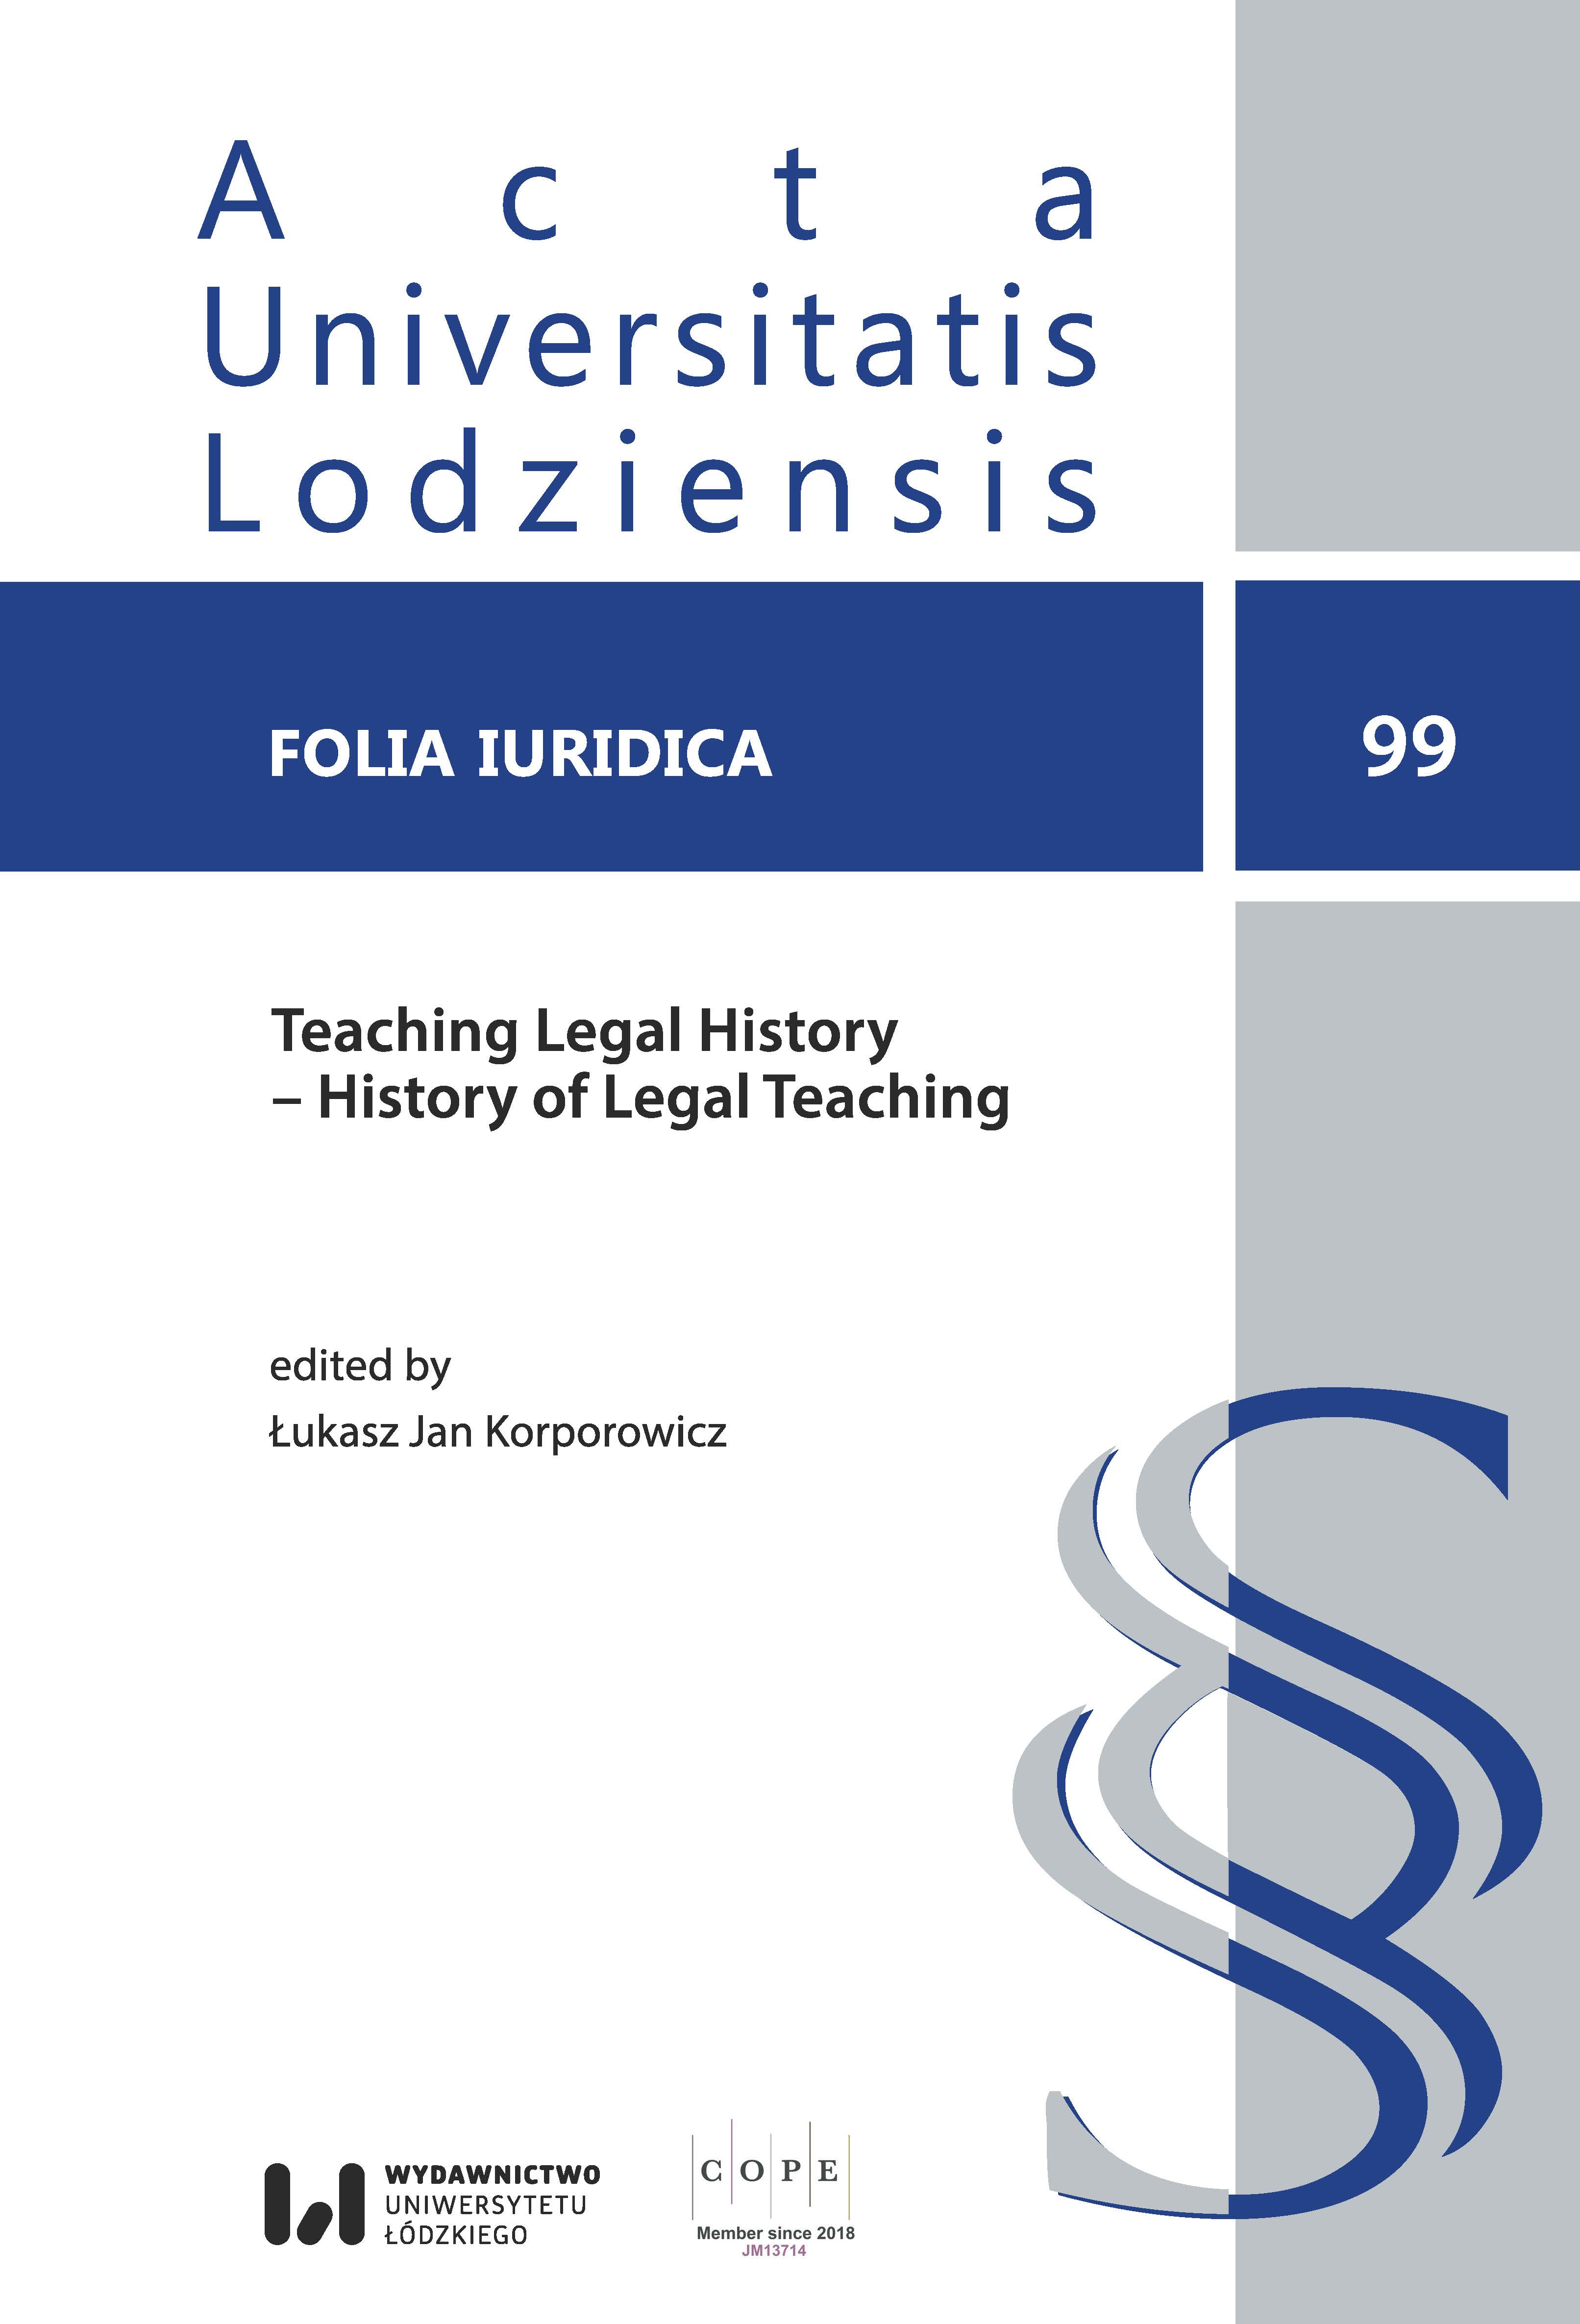 Teaching Comparative Law in Eighteenth-Century England: Thomas Bever as a Comparative Lawyer as Exemplified by his Lectures on Polish Law and the Constitution Cover Image